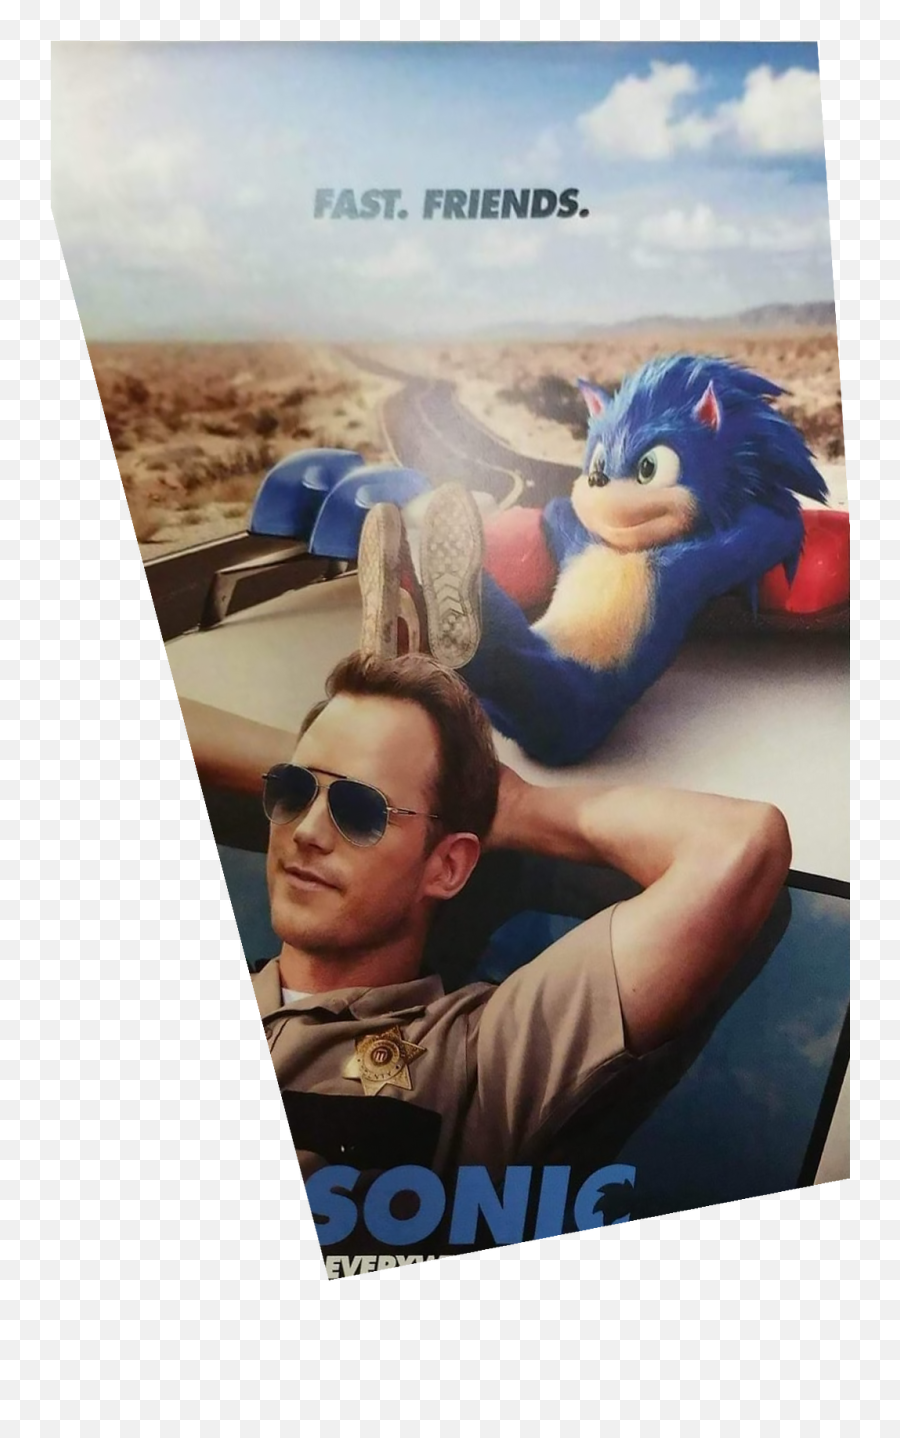 How The Leaked Chris Pratt Design Of Sonic Actually Looked - Sonic The Hedgehog Movie Fast Friends Poster Png,Chris Pratt Png